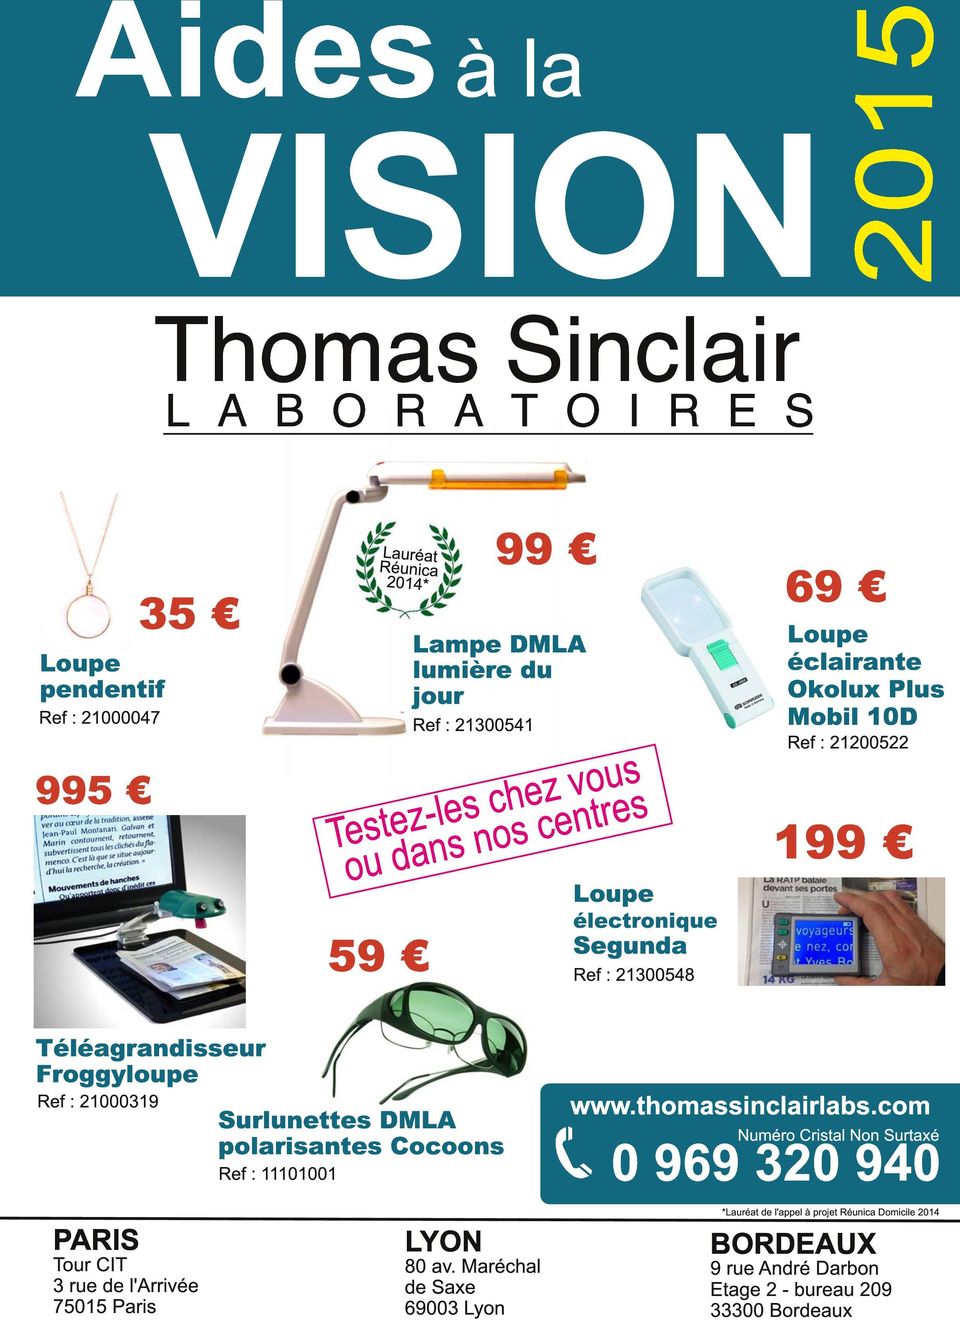 Froggyloupe Ref : 21 00031 9 Surlunettes DMLA polarisantes Cocoons Ref : 111 01 001 www.thomassinclairlabs.